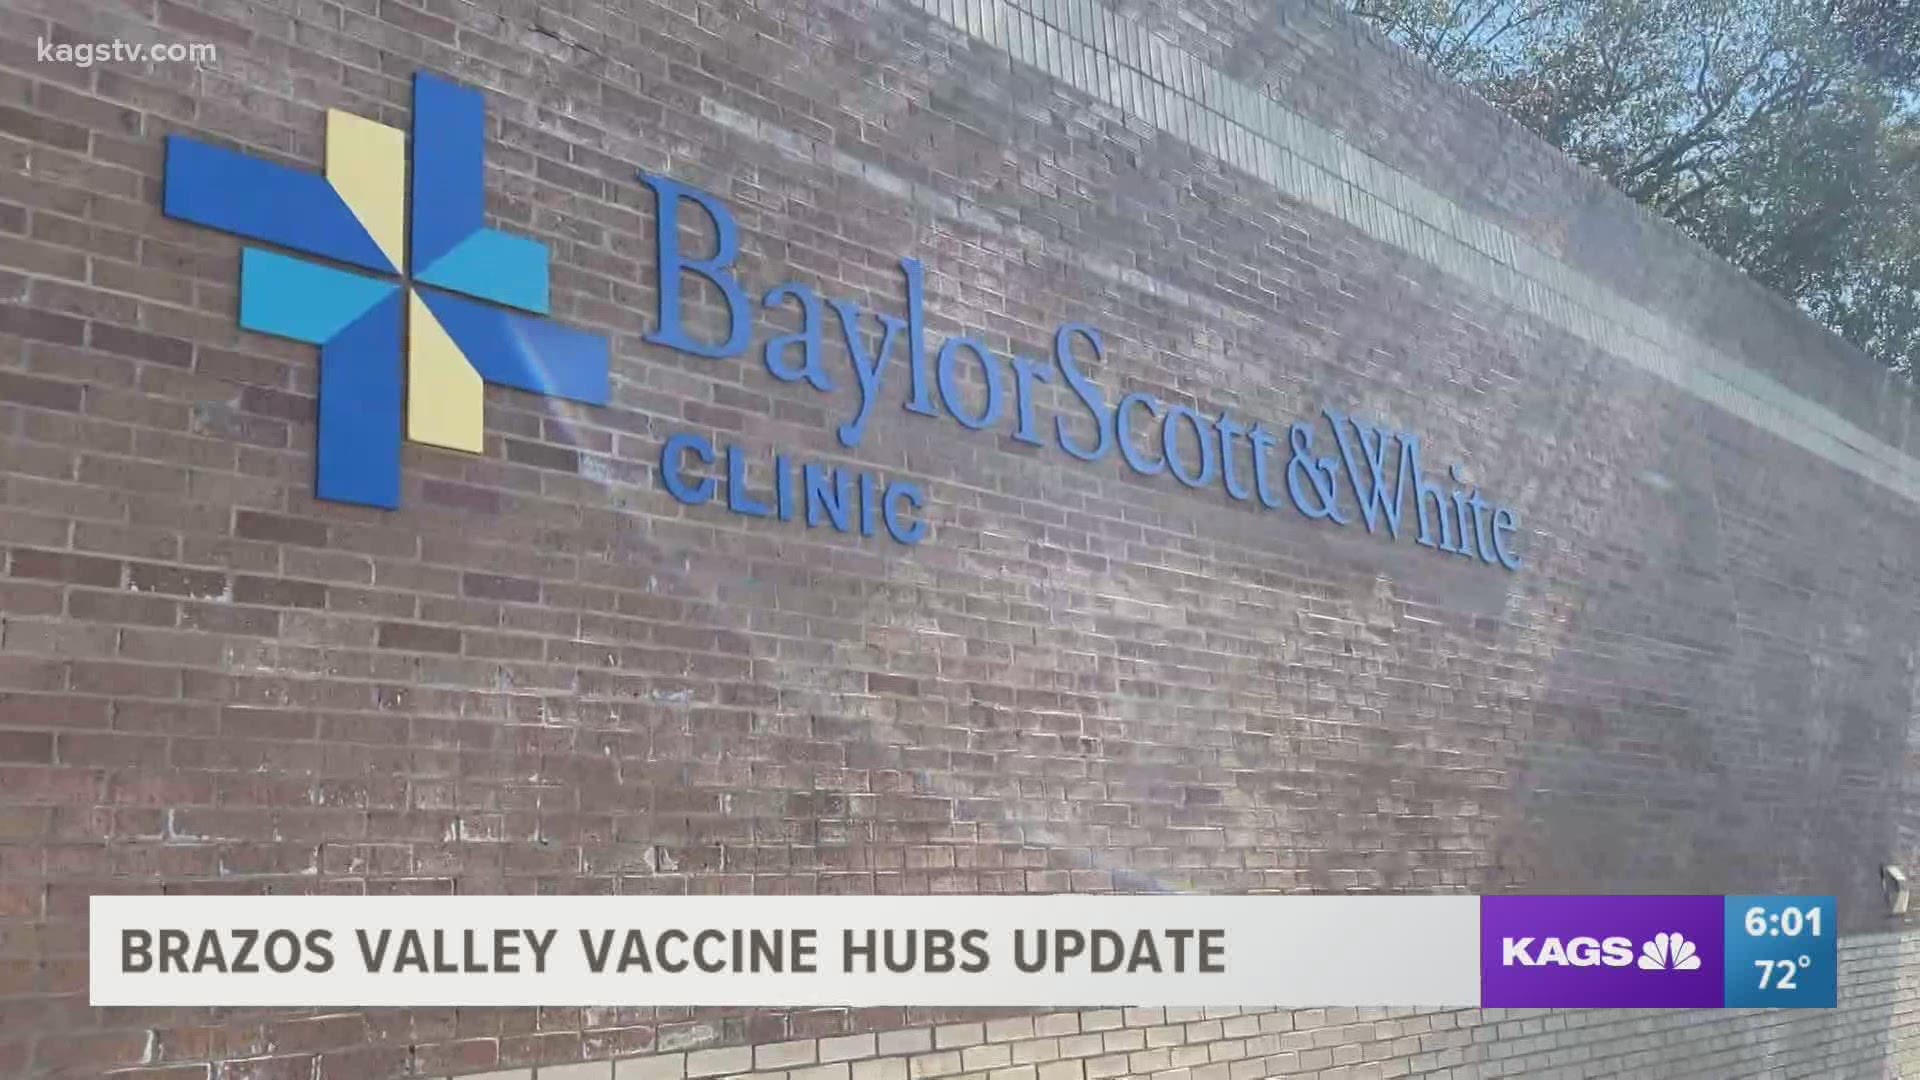 KAGS News reached out to all the Brazos Valley vaccine hub leaders and found out what updates are going on this week March 8-12.